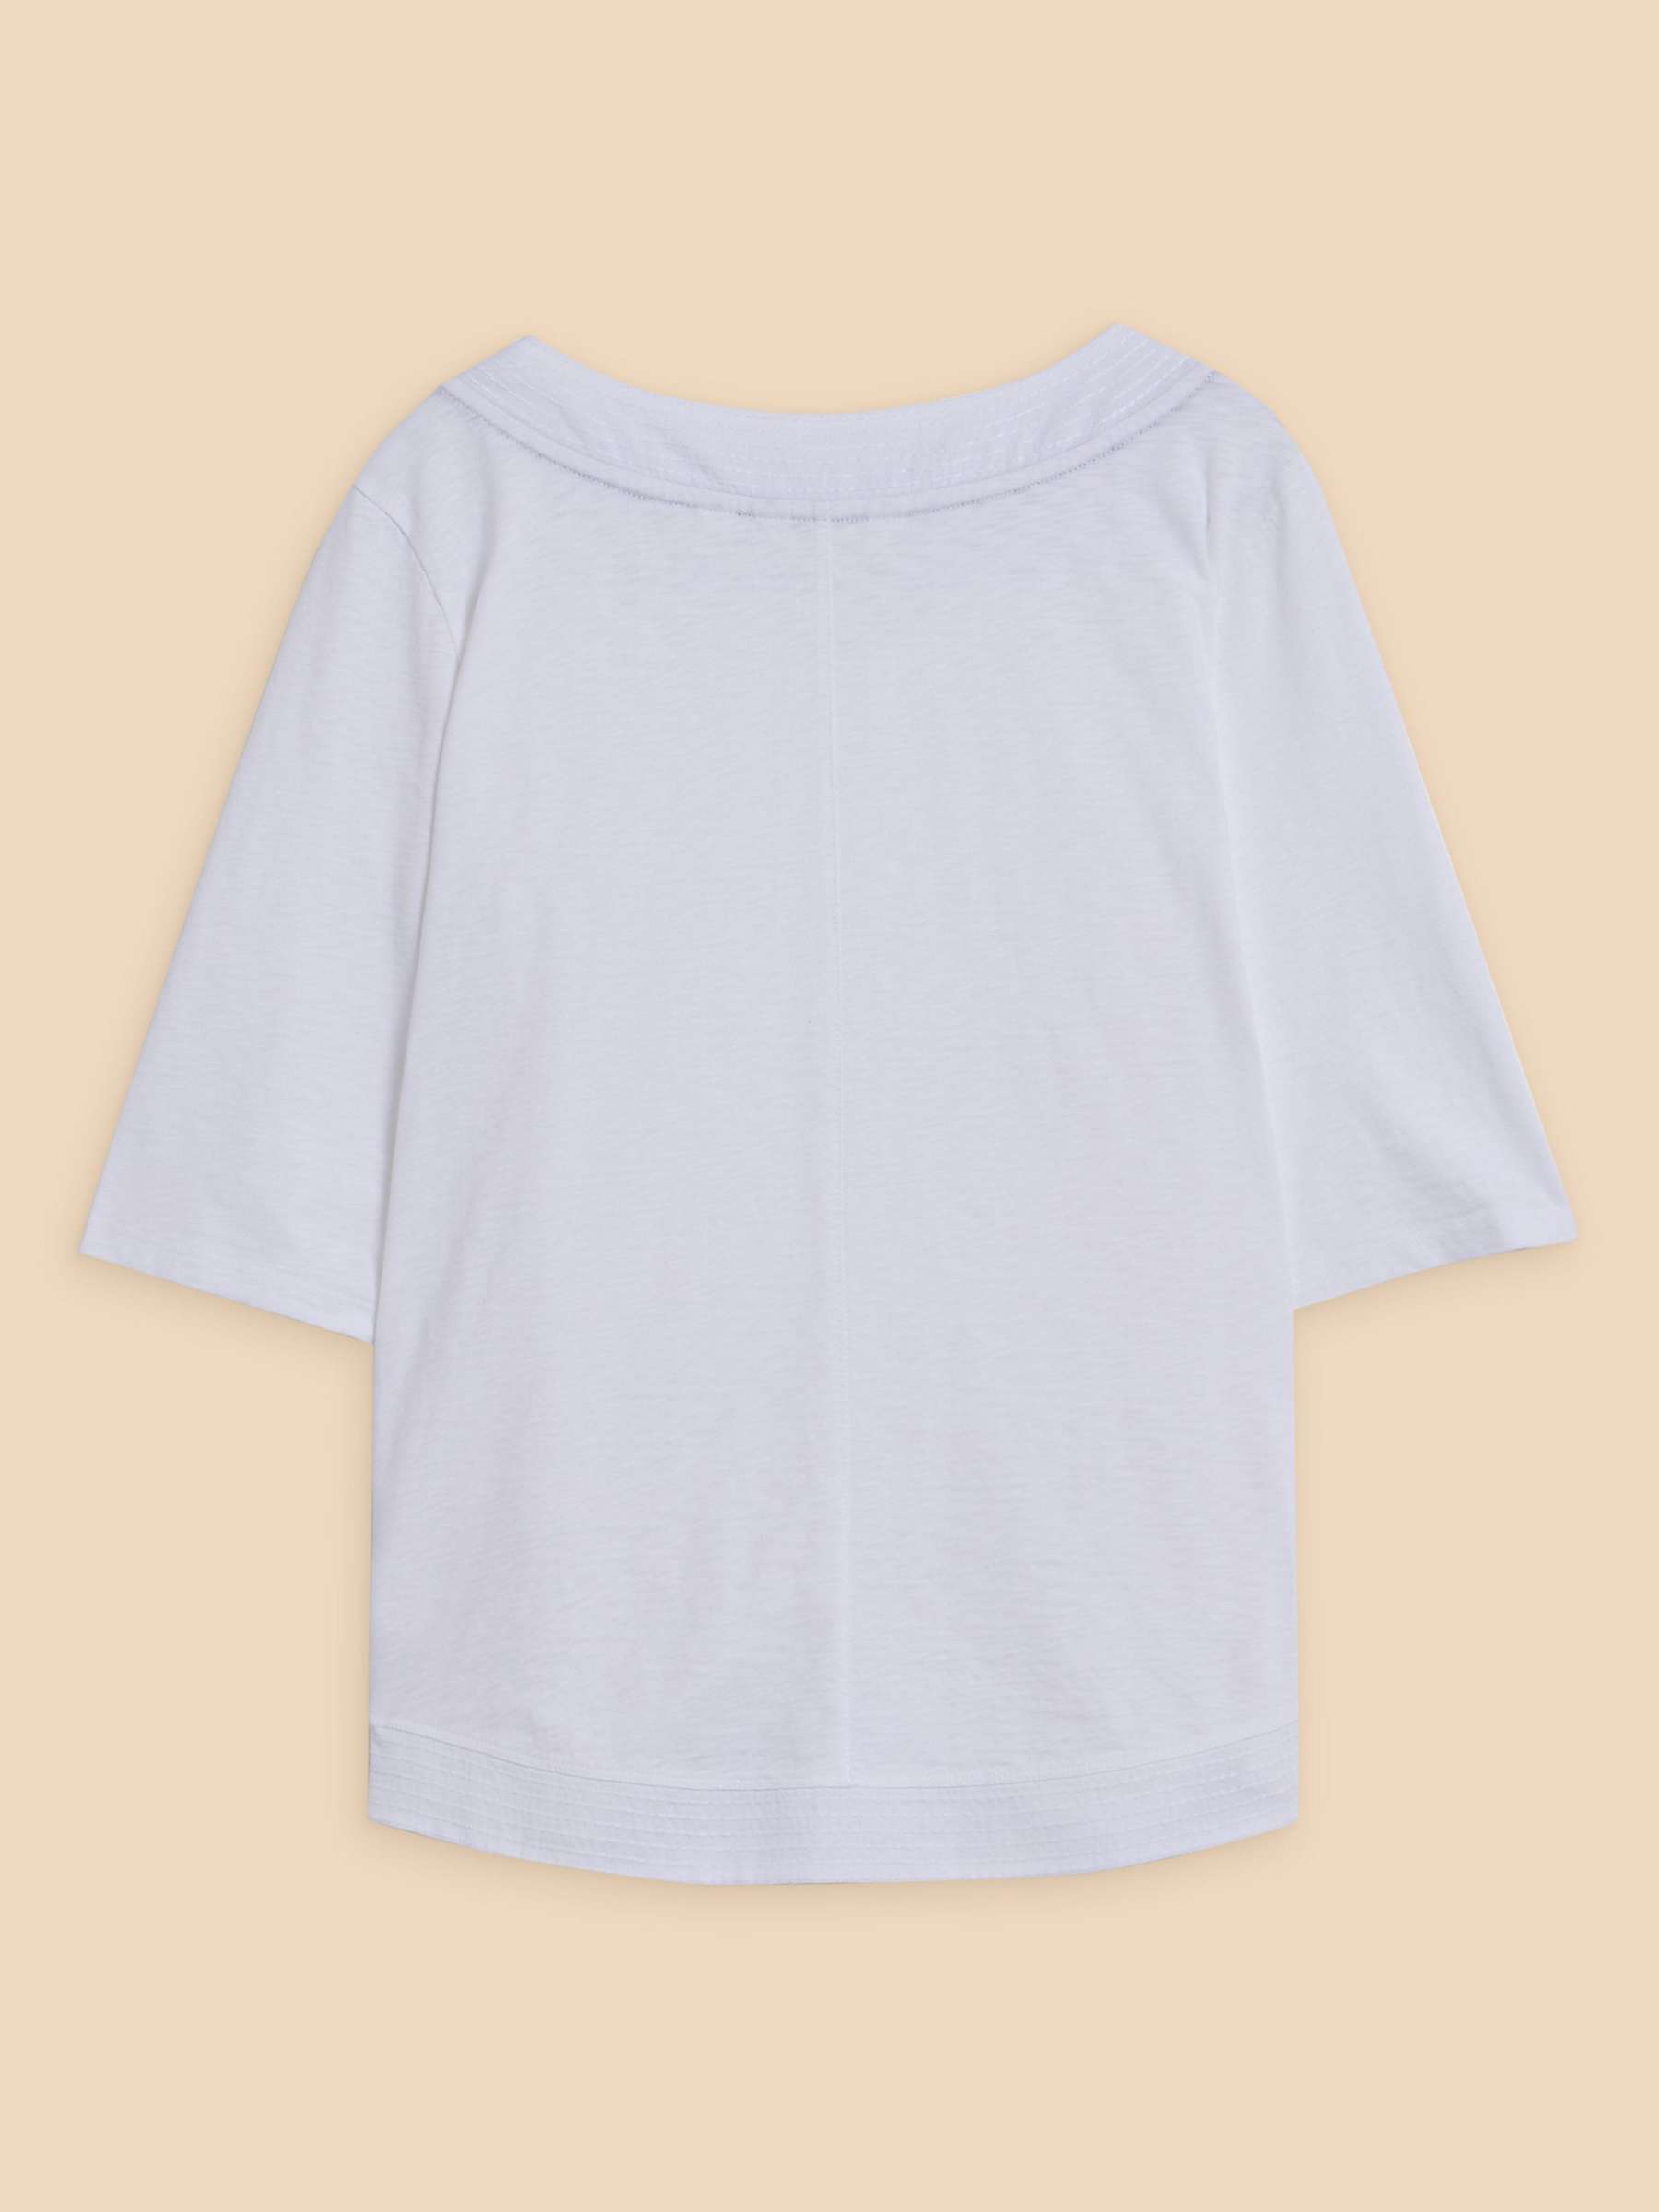 Buy White Stuff Weaver Embroidered Top, White Online at johnlewis.com